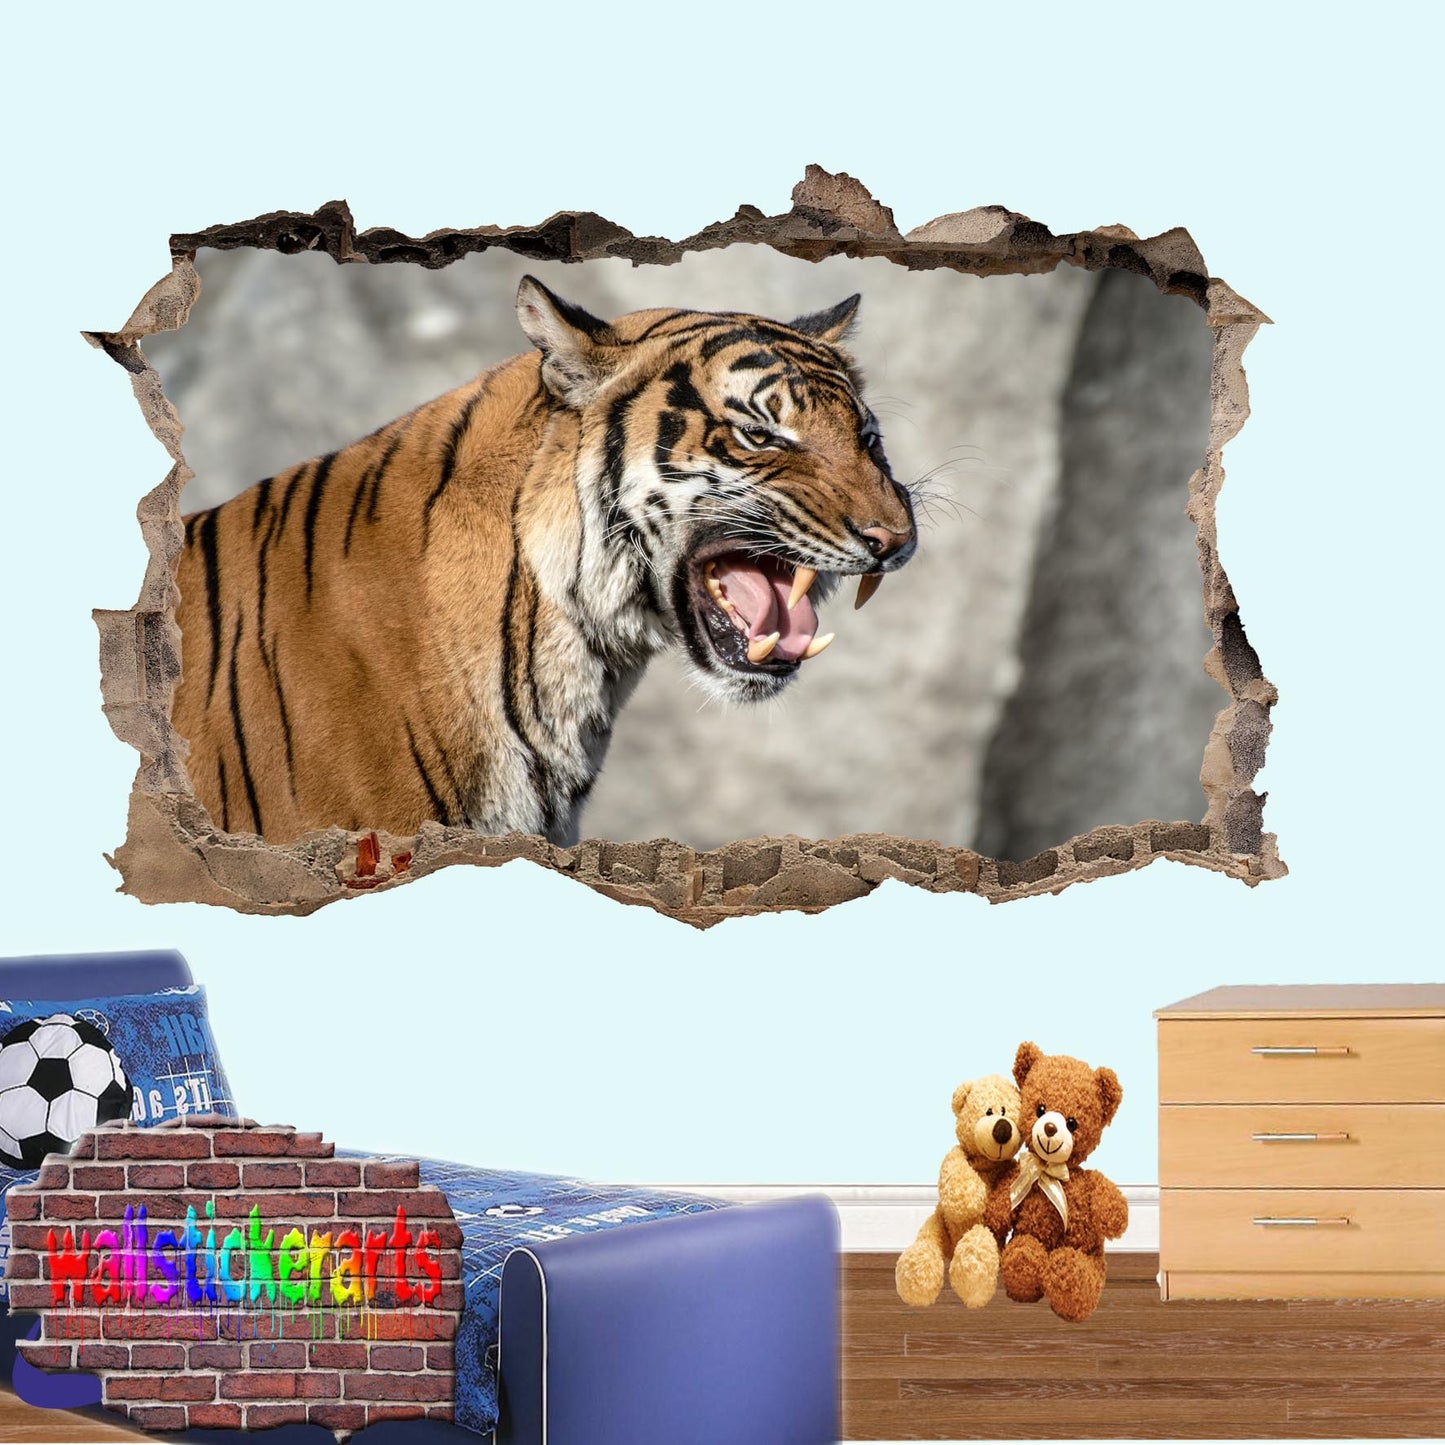 Wildlife Animals Tiger 3d Art Smashed Effect Wall Stickers Room Office Nursery Shop Decor Decal Mural